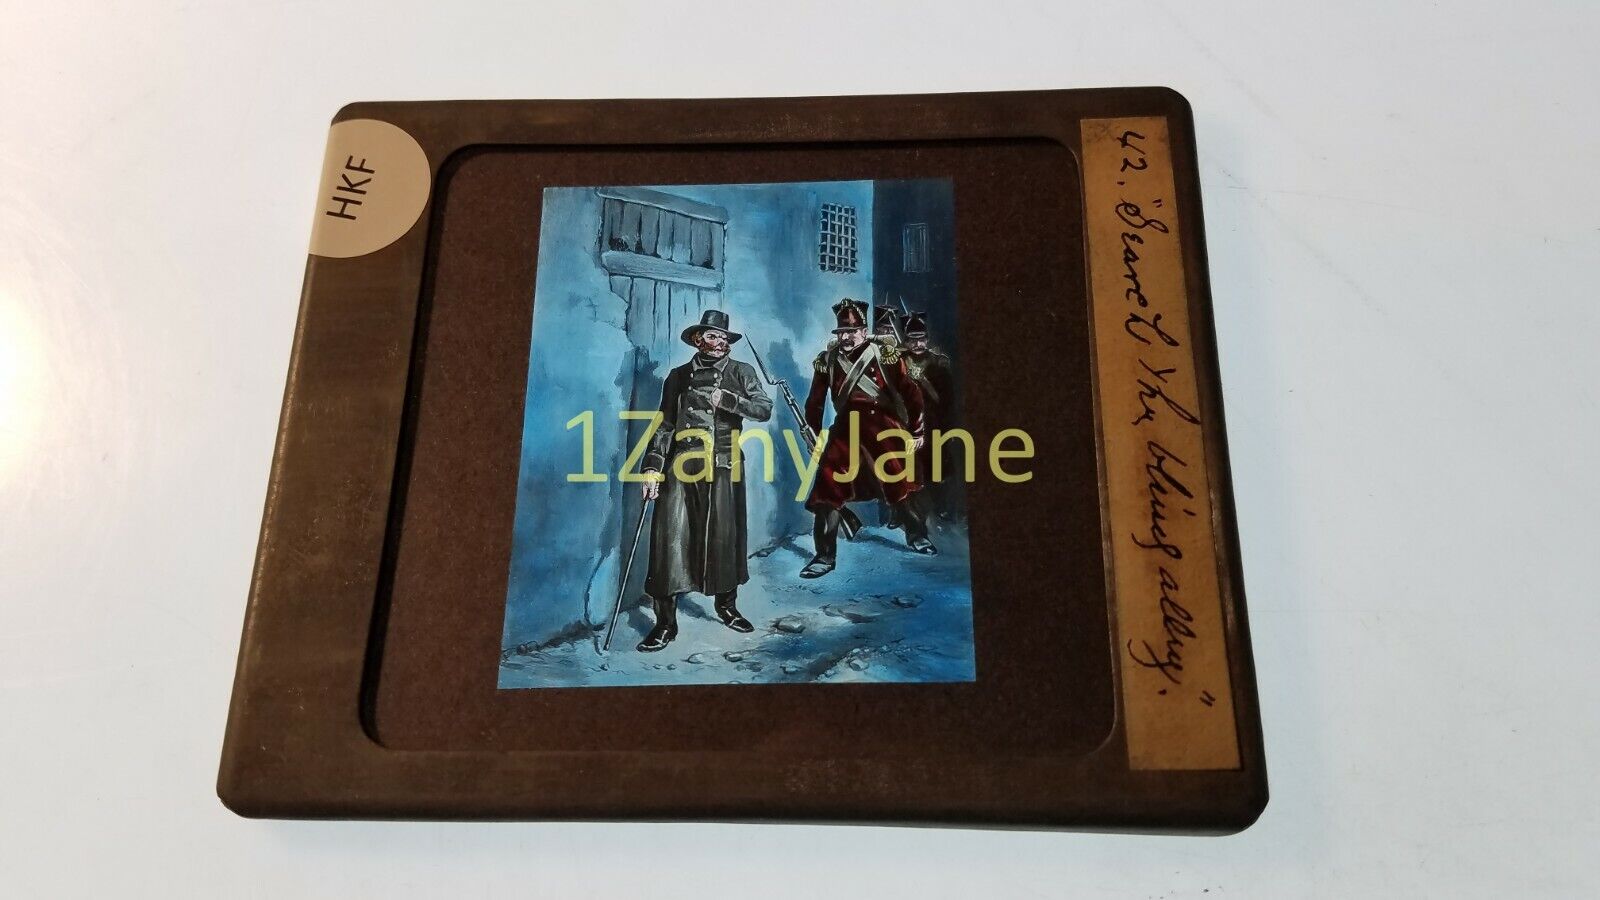 HKF Glass Magic Lantern Slide Photo MAN AND SOLDIERS IN BLIND ALLEY (VALJEAN?)